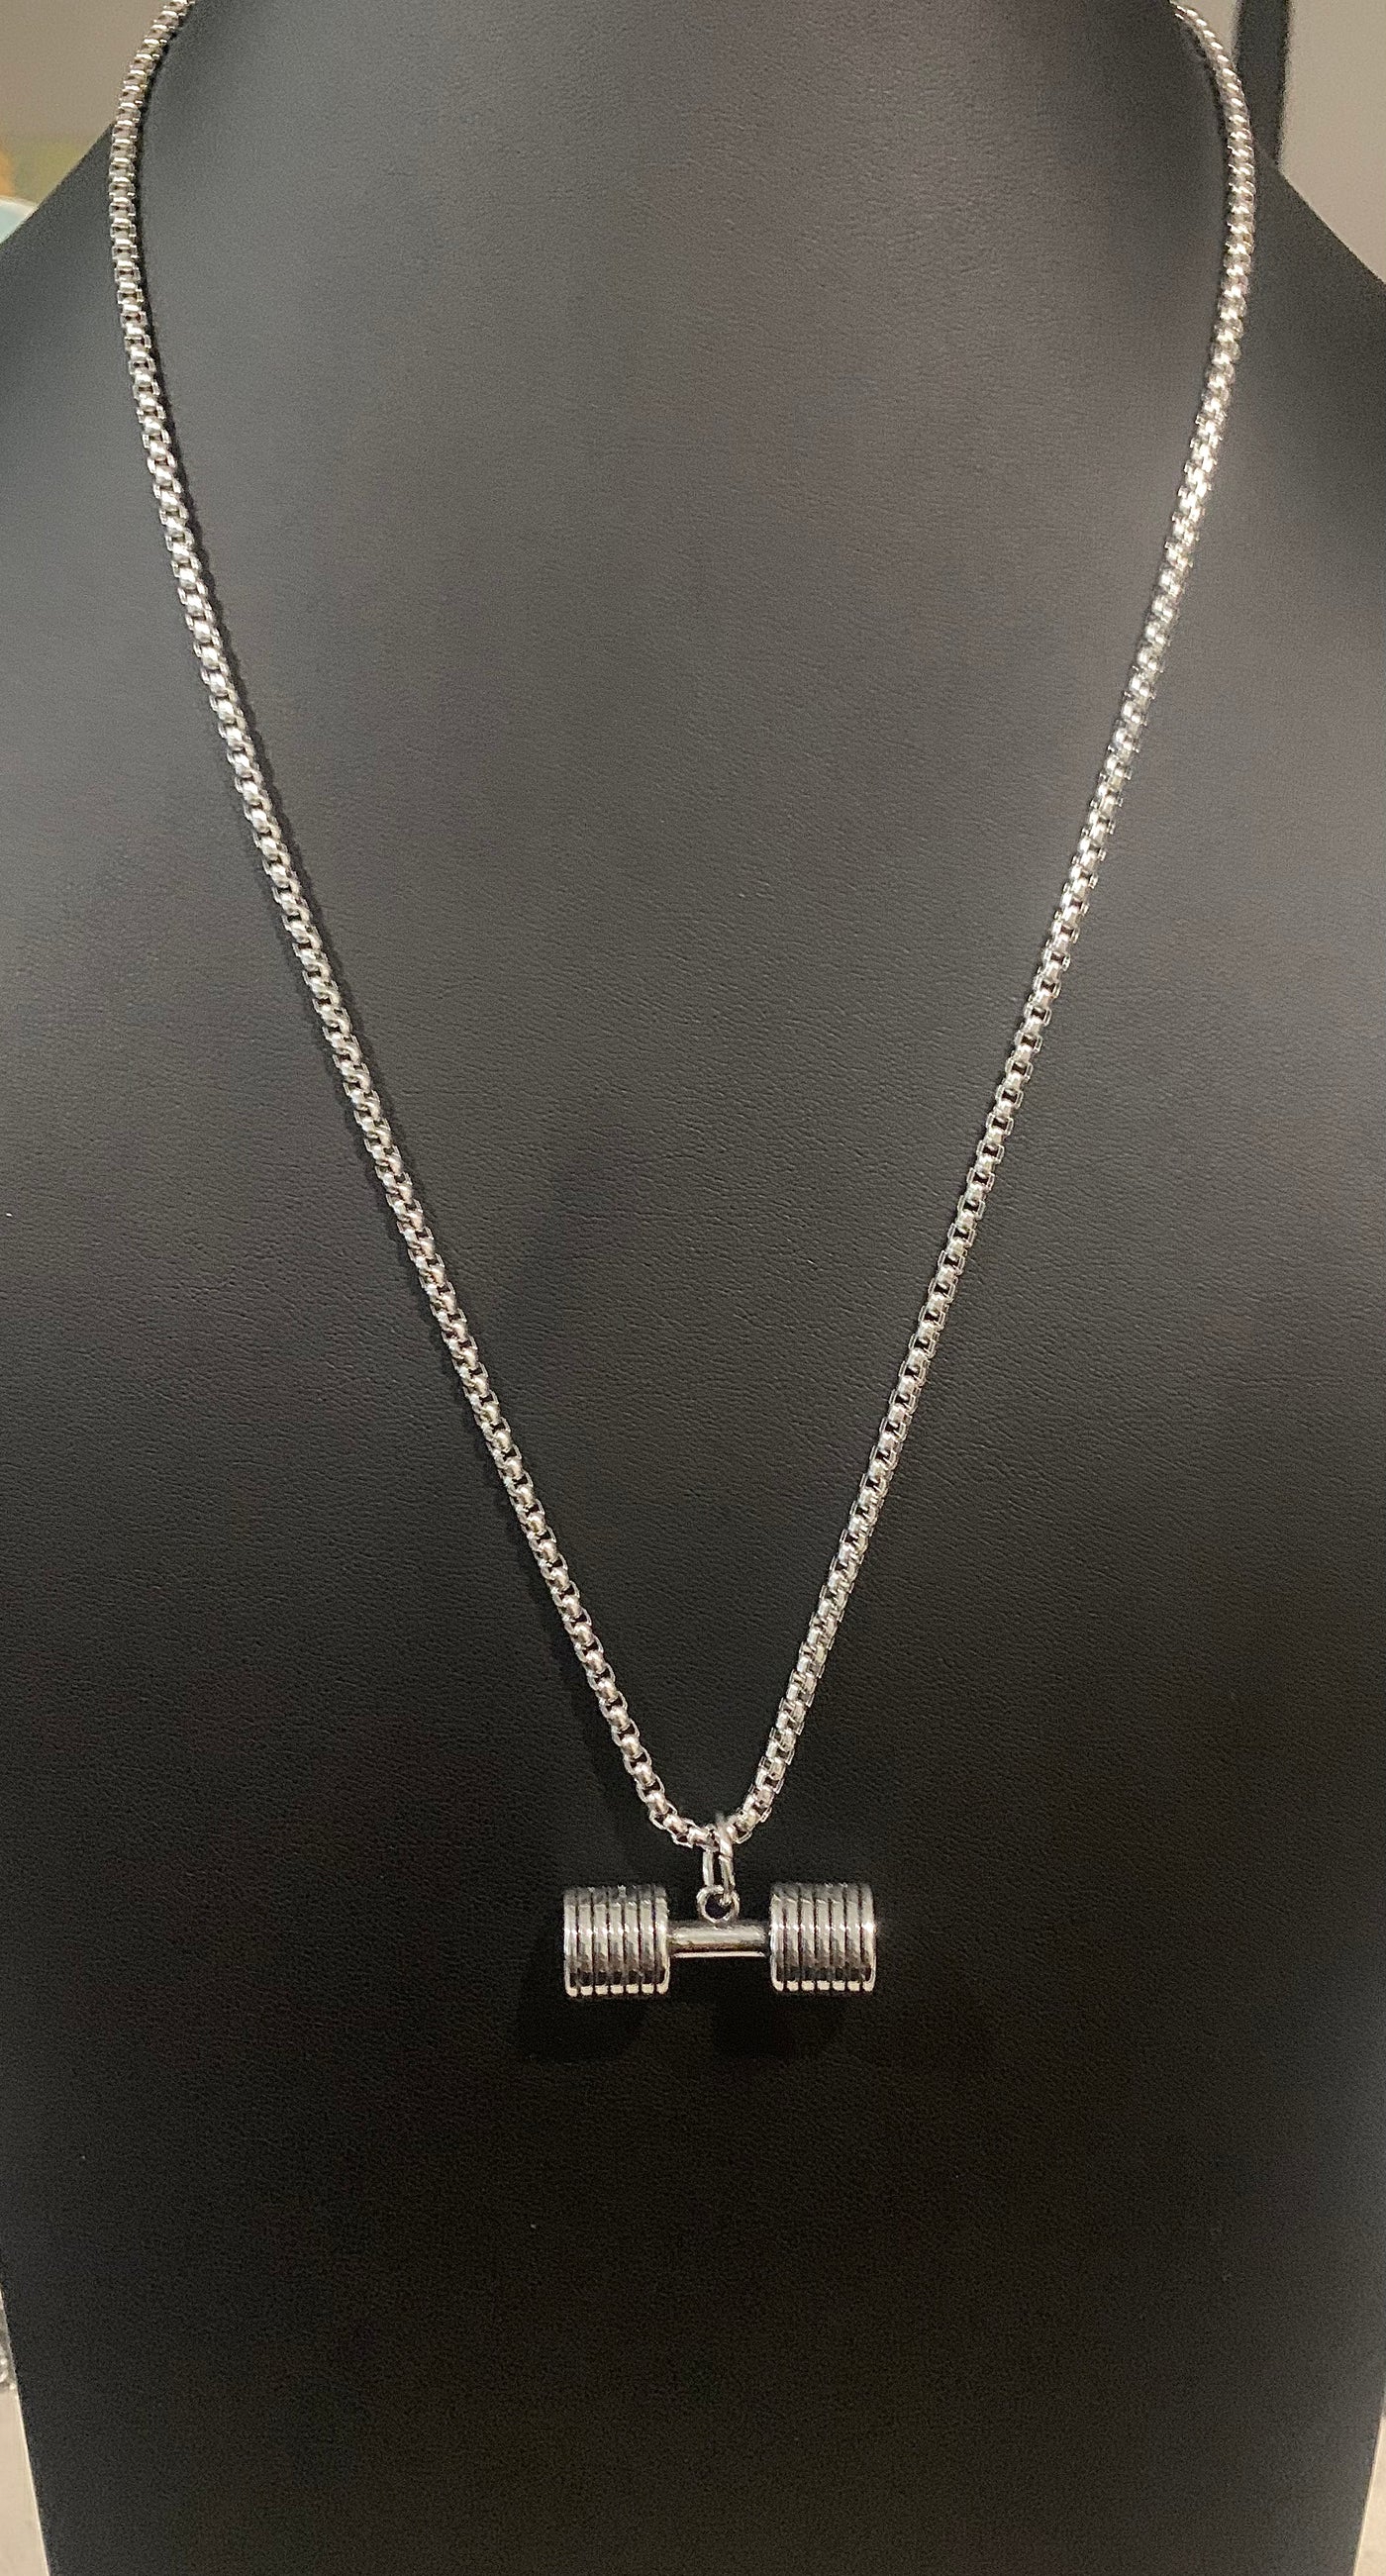 Dumbbell Necklace (7 plate)